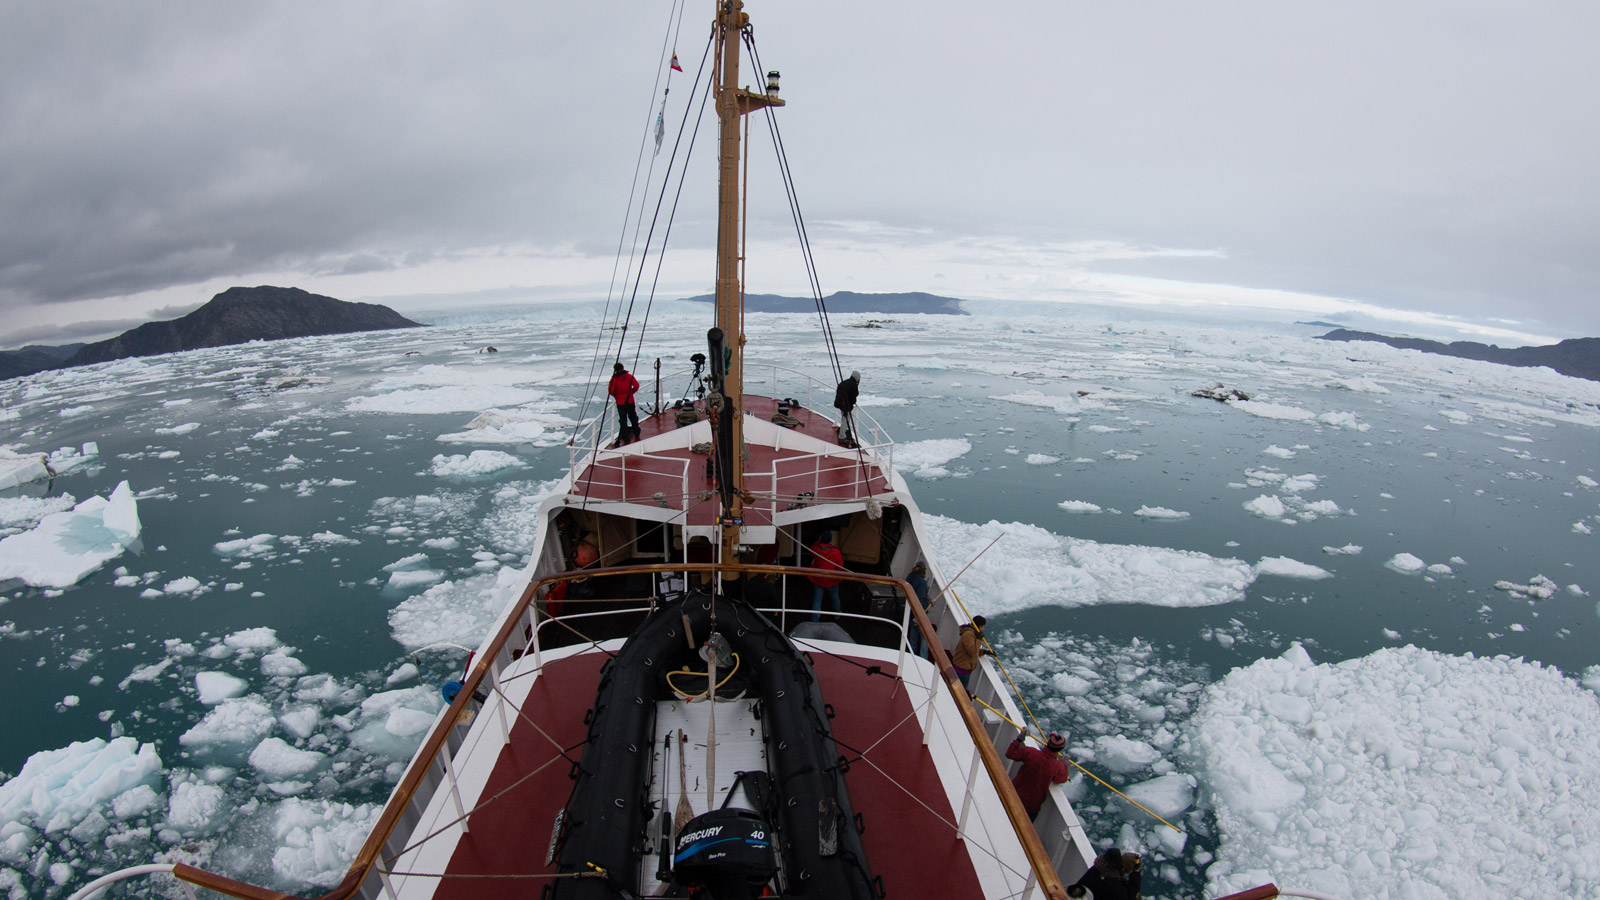 Glaciologists from the University of California, Irvine, and JPL mapped remote Greenland fjords by ship in 2014.